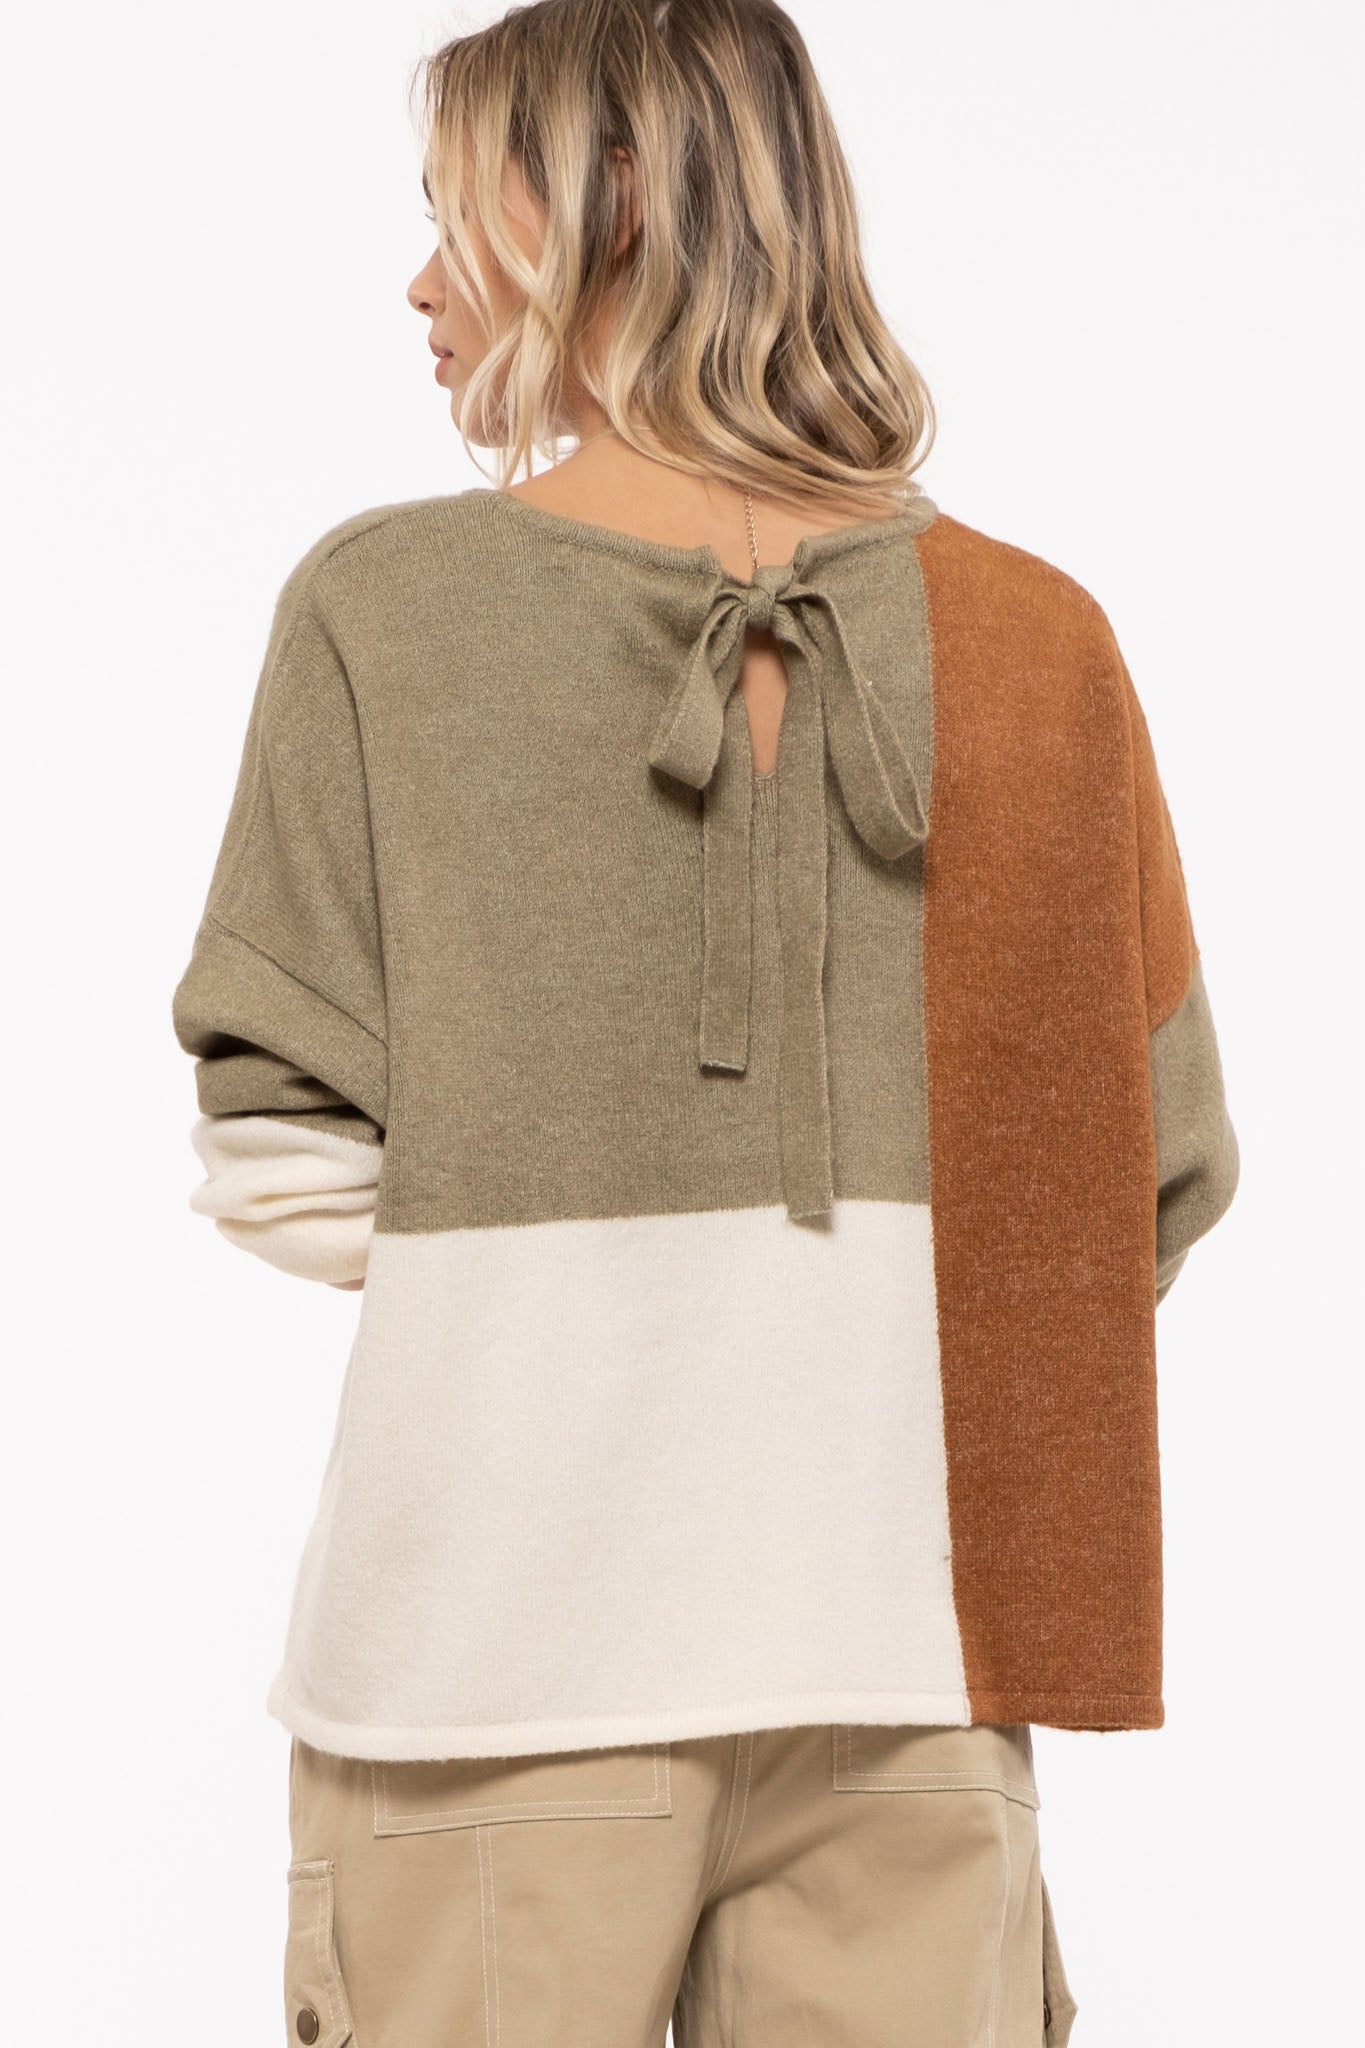 Sweater with full blouson sleeves and back ribbon tie  Ivy and Pearl Boutique   